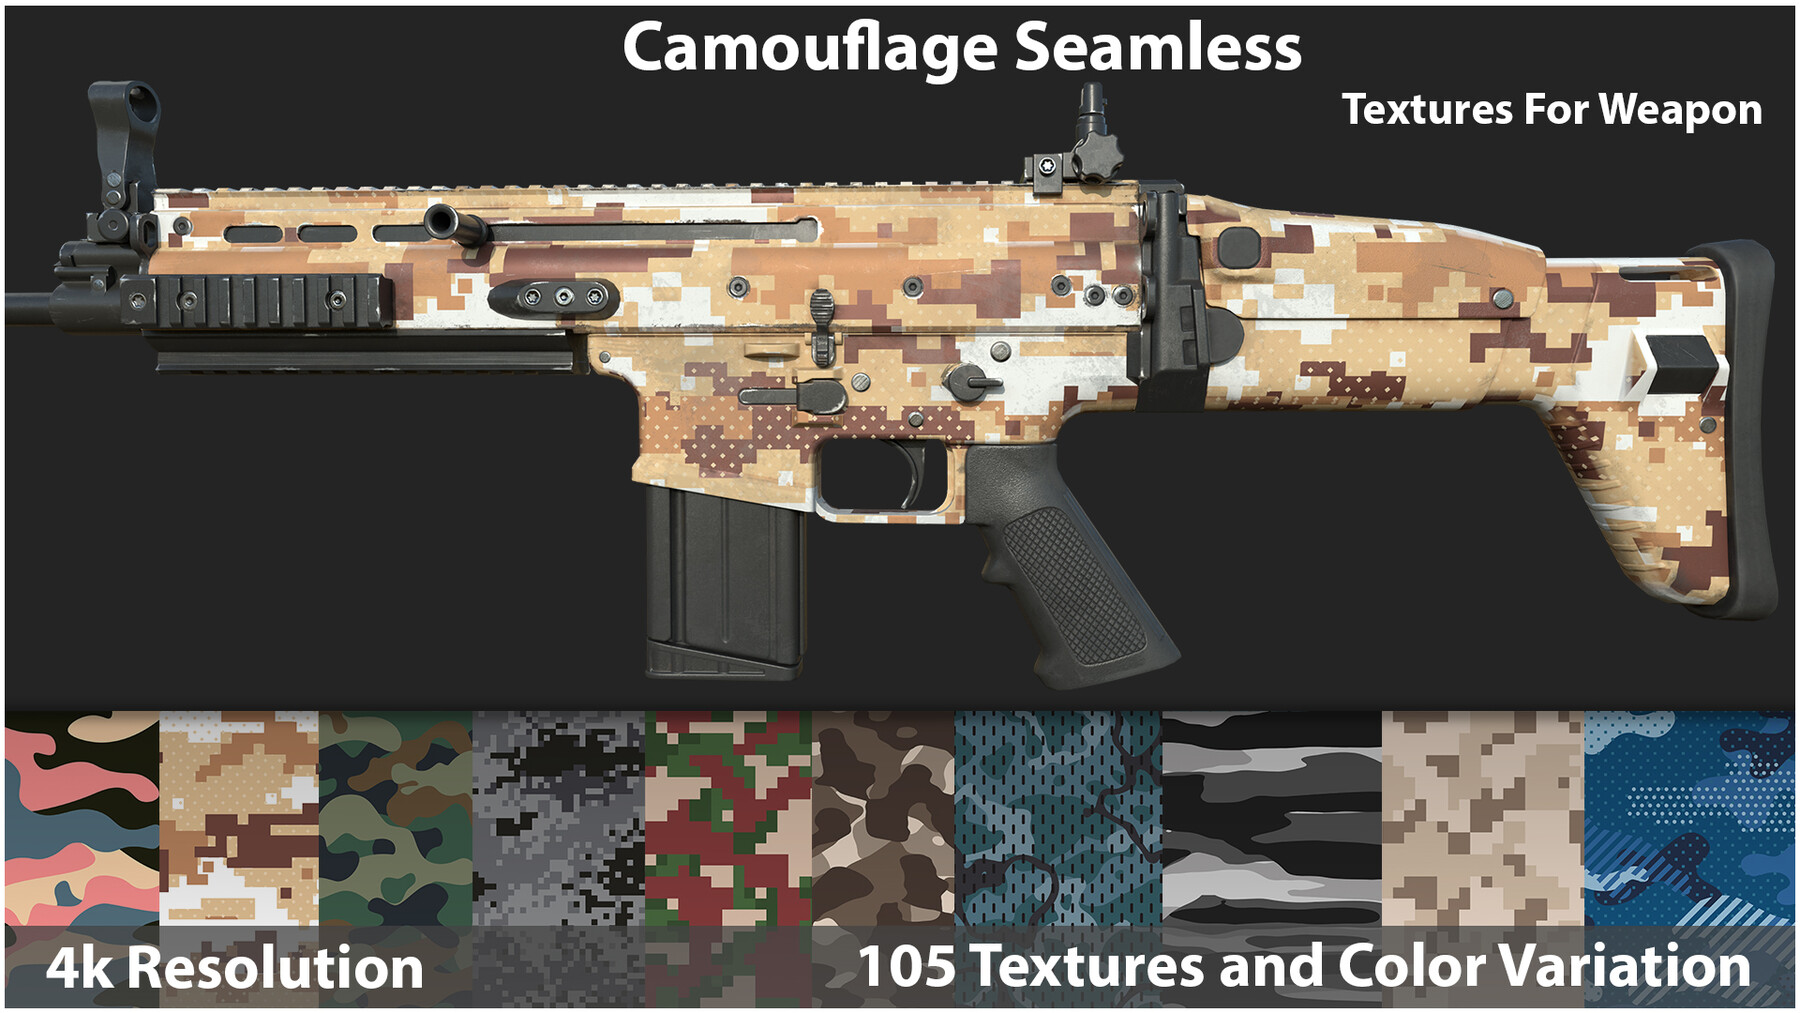 ArtStation - Camouflage Seamless - Textures For Weapon